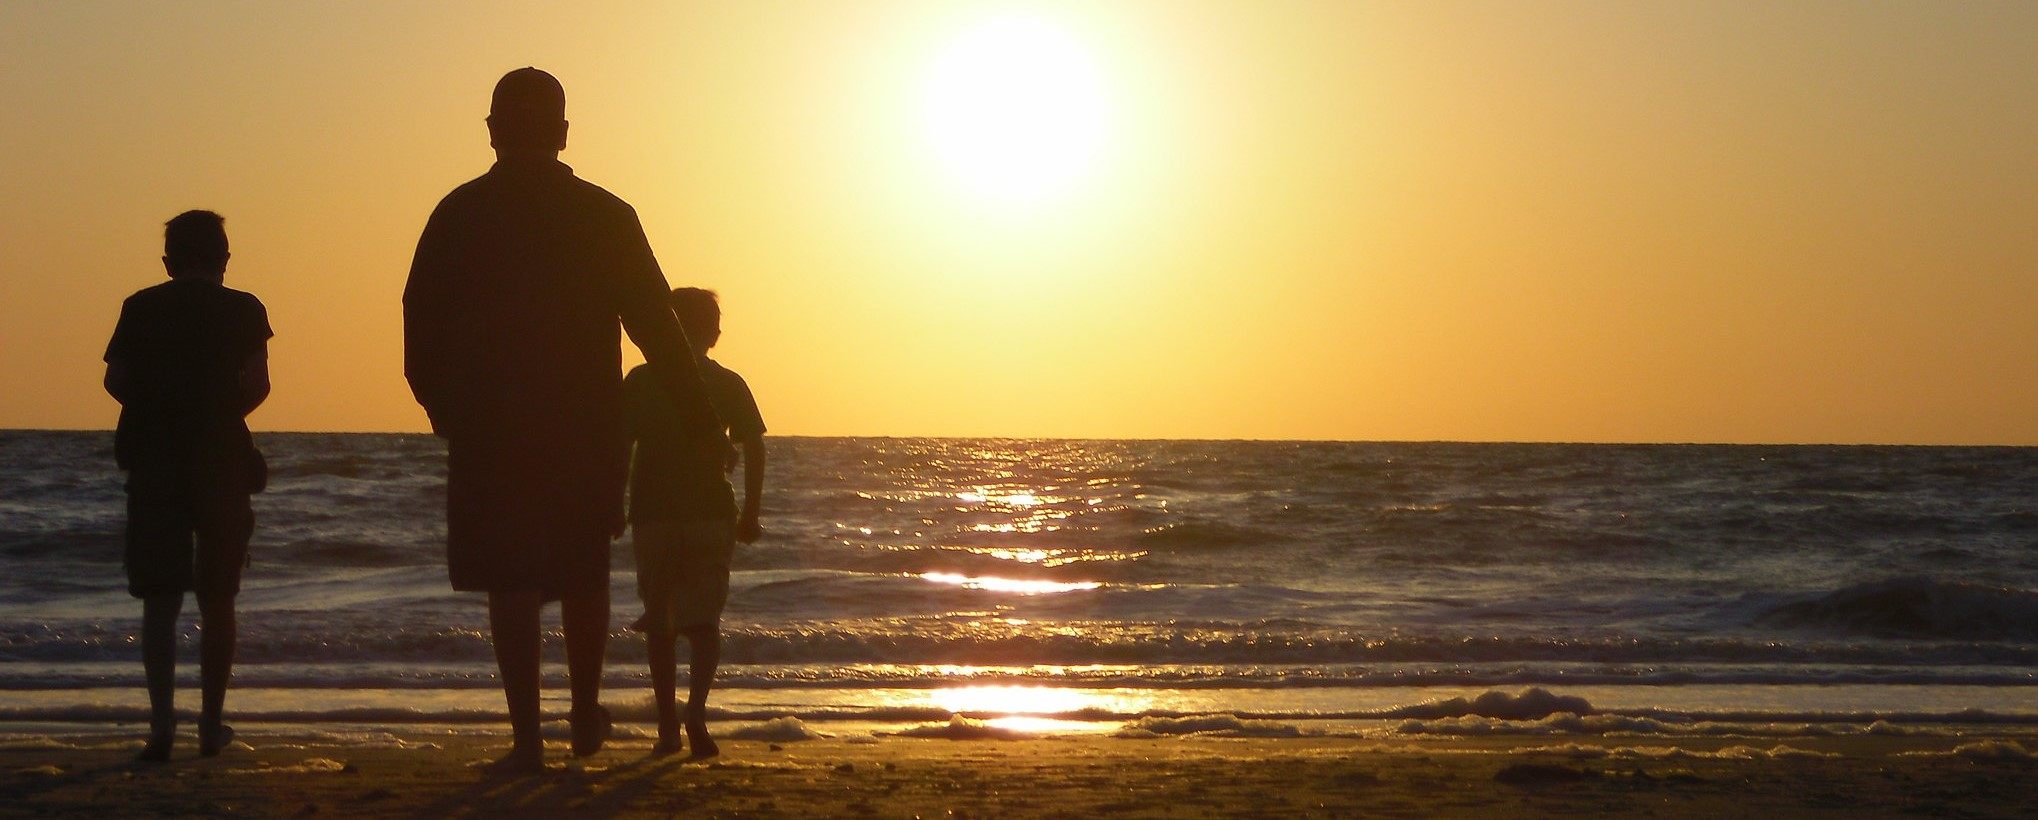 This picture shows a family on the beach looking into the sunset.